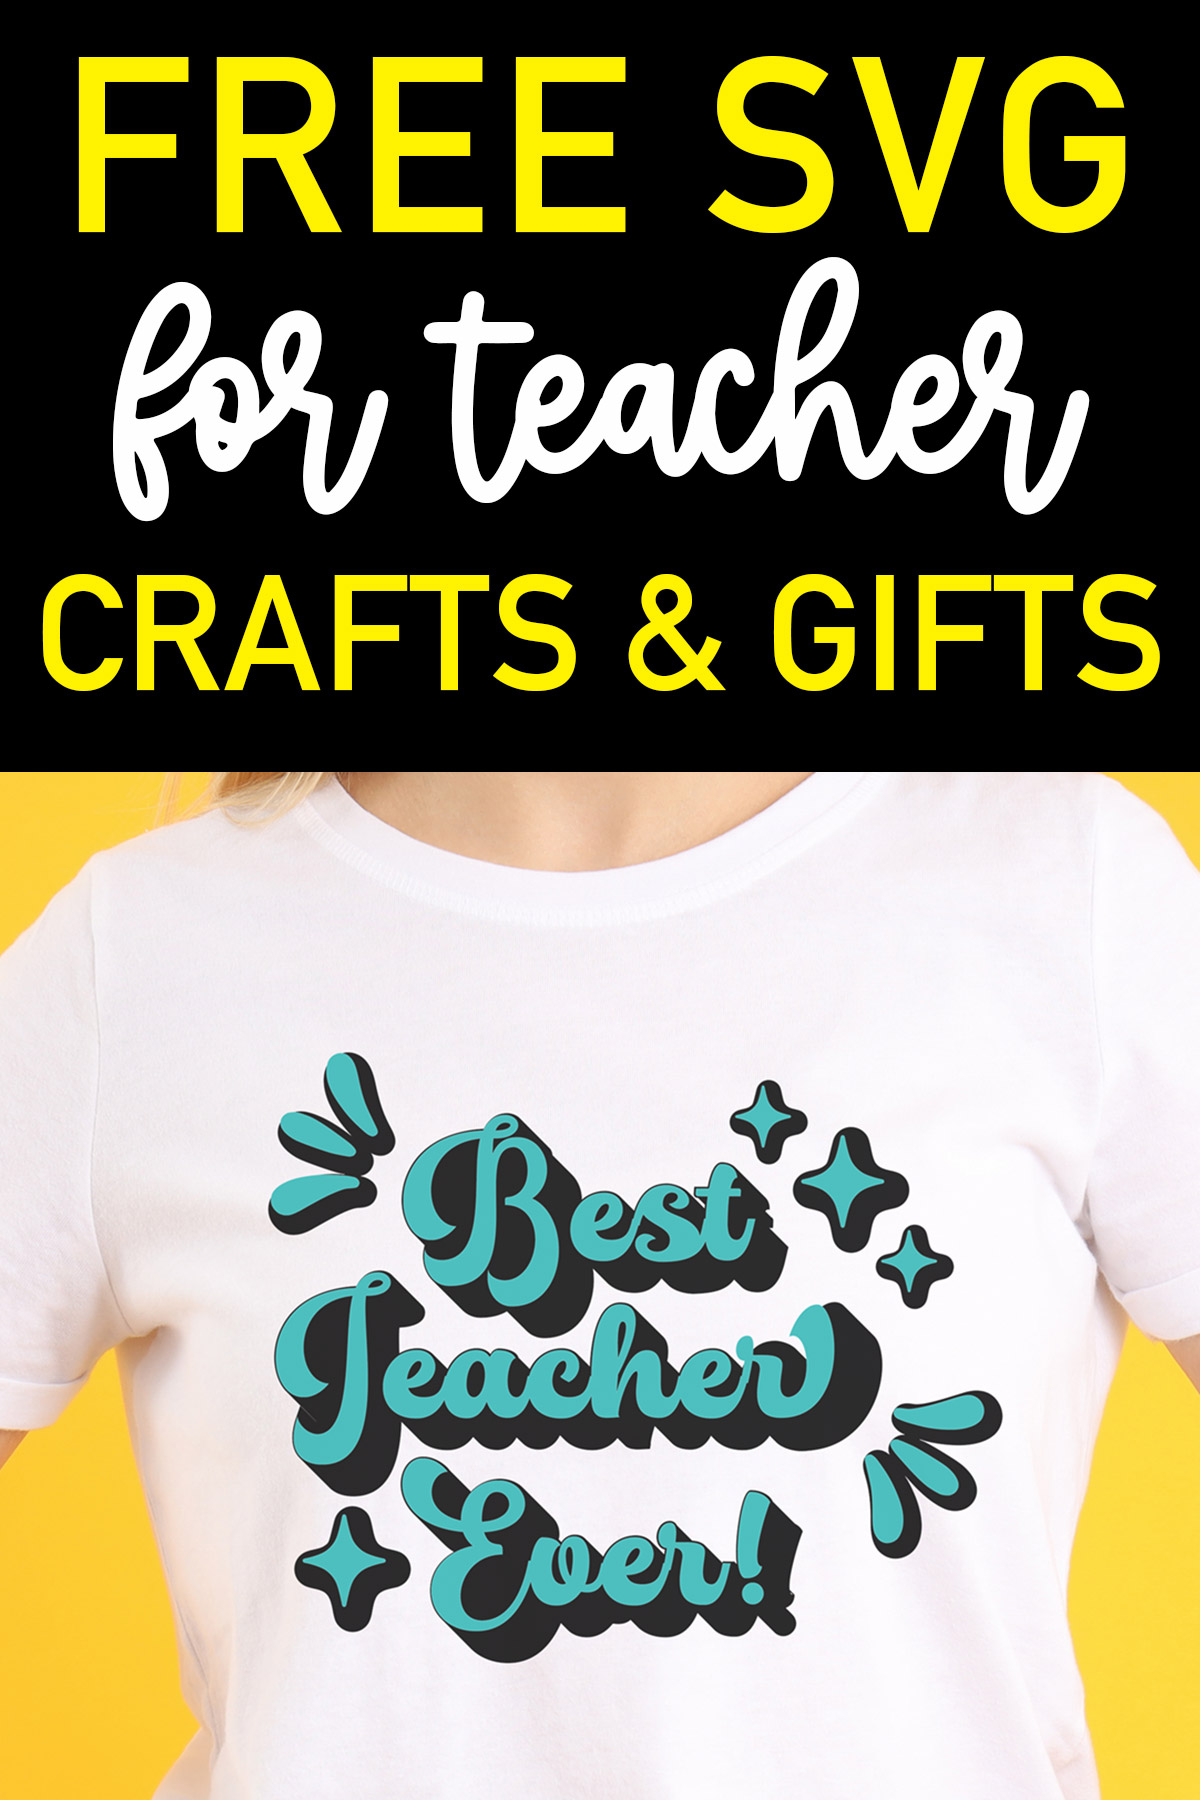 At the top it says free svg for teacher crafts and gifts. Below that, an image shows a woman wearing a shirt that says best teacher ever. It is the best teacher svg free file you can get in this post.